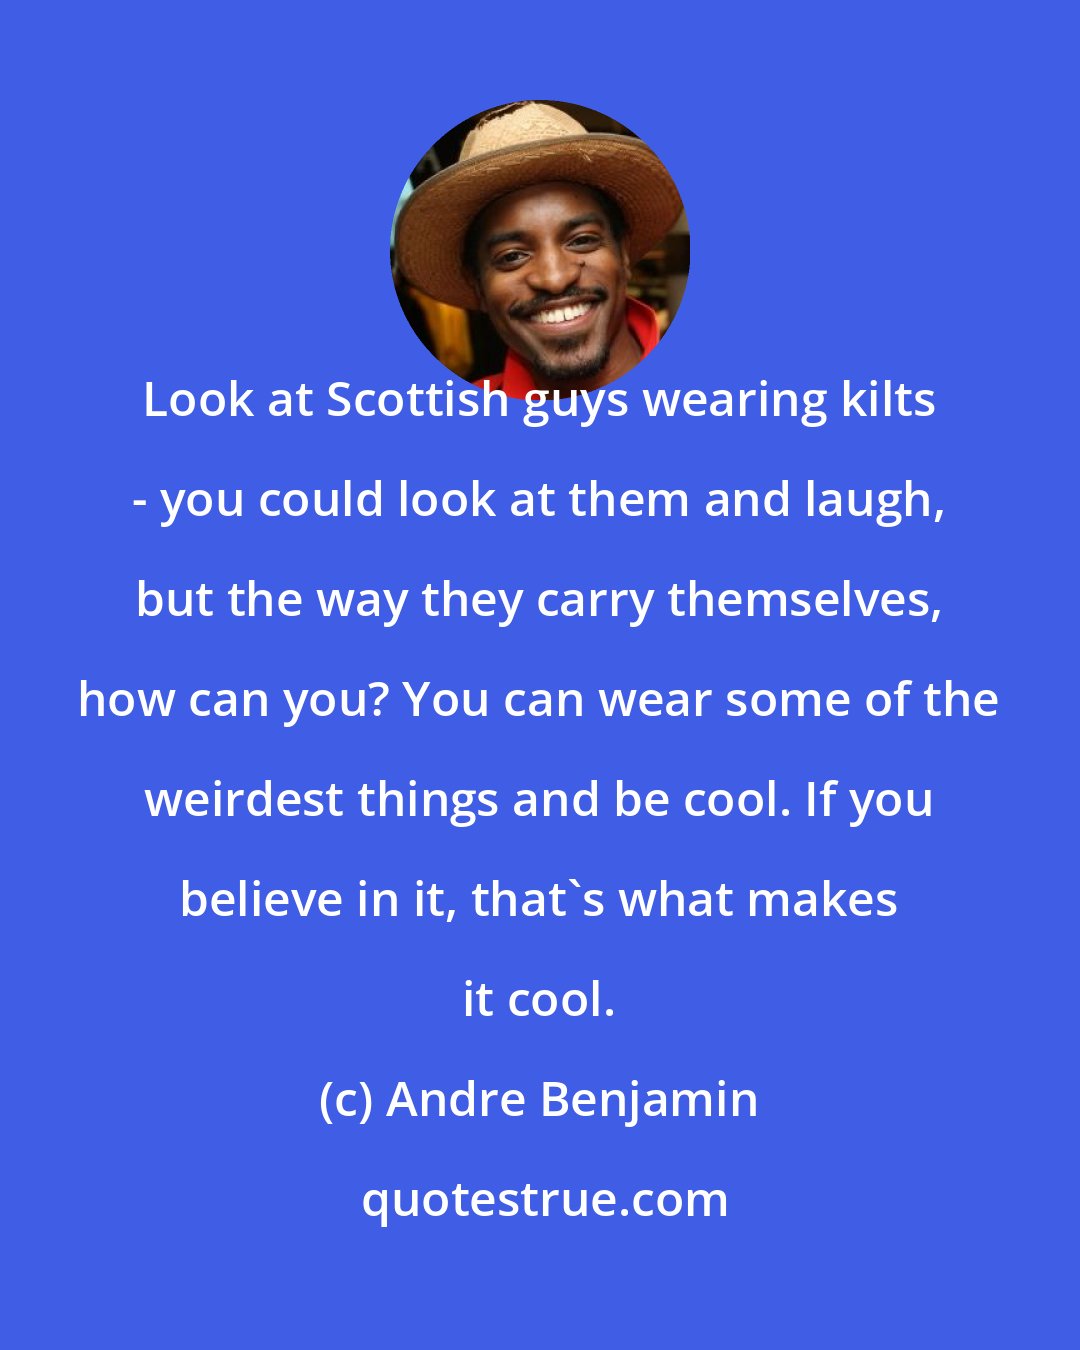 Andre Benjamin: Look at Scottish guys wearing kilts - you could look at them and laugh, but the way they carry themselves, how can you? You can wear some of the weirdest things and be cool. If you believe in it, that's what makes it cool.